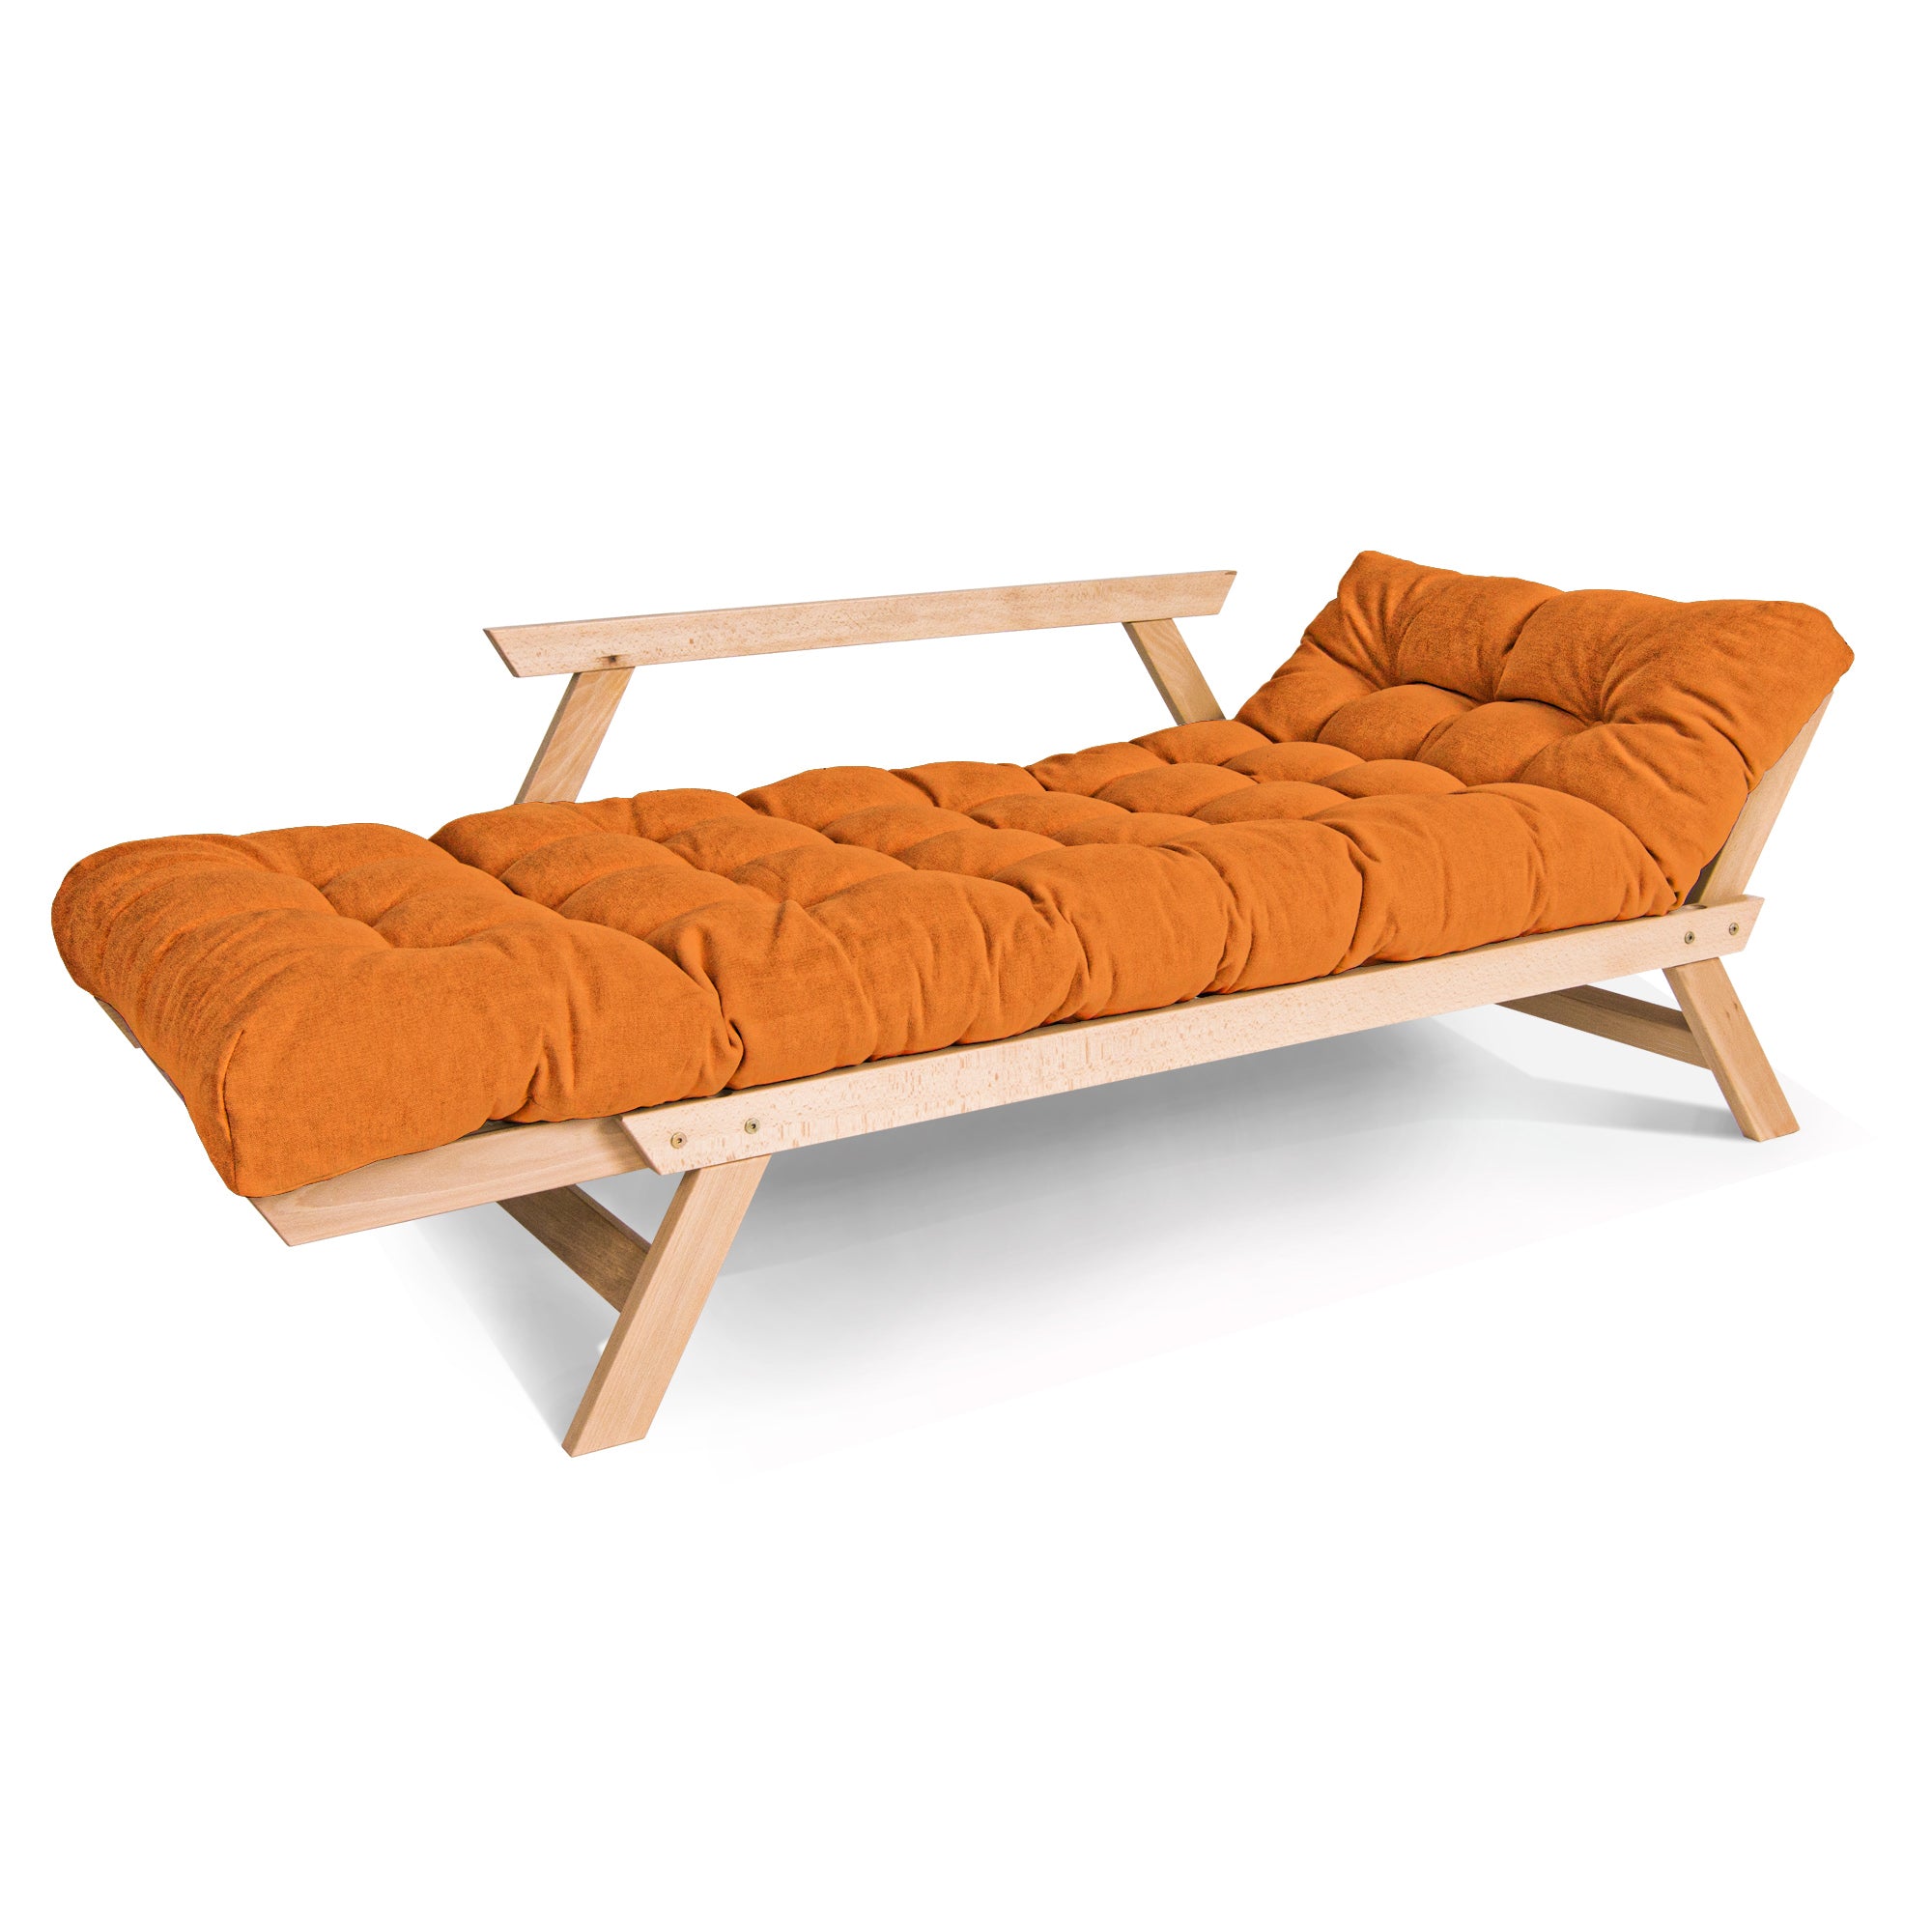 ALLEGRO Futon Sofa Bed  Space-Saving Style for Small Homes